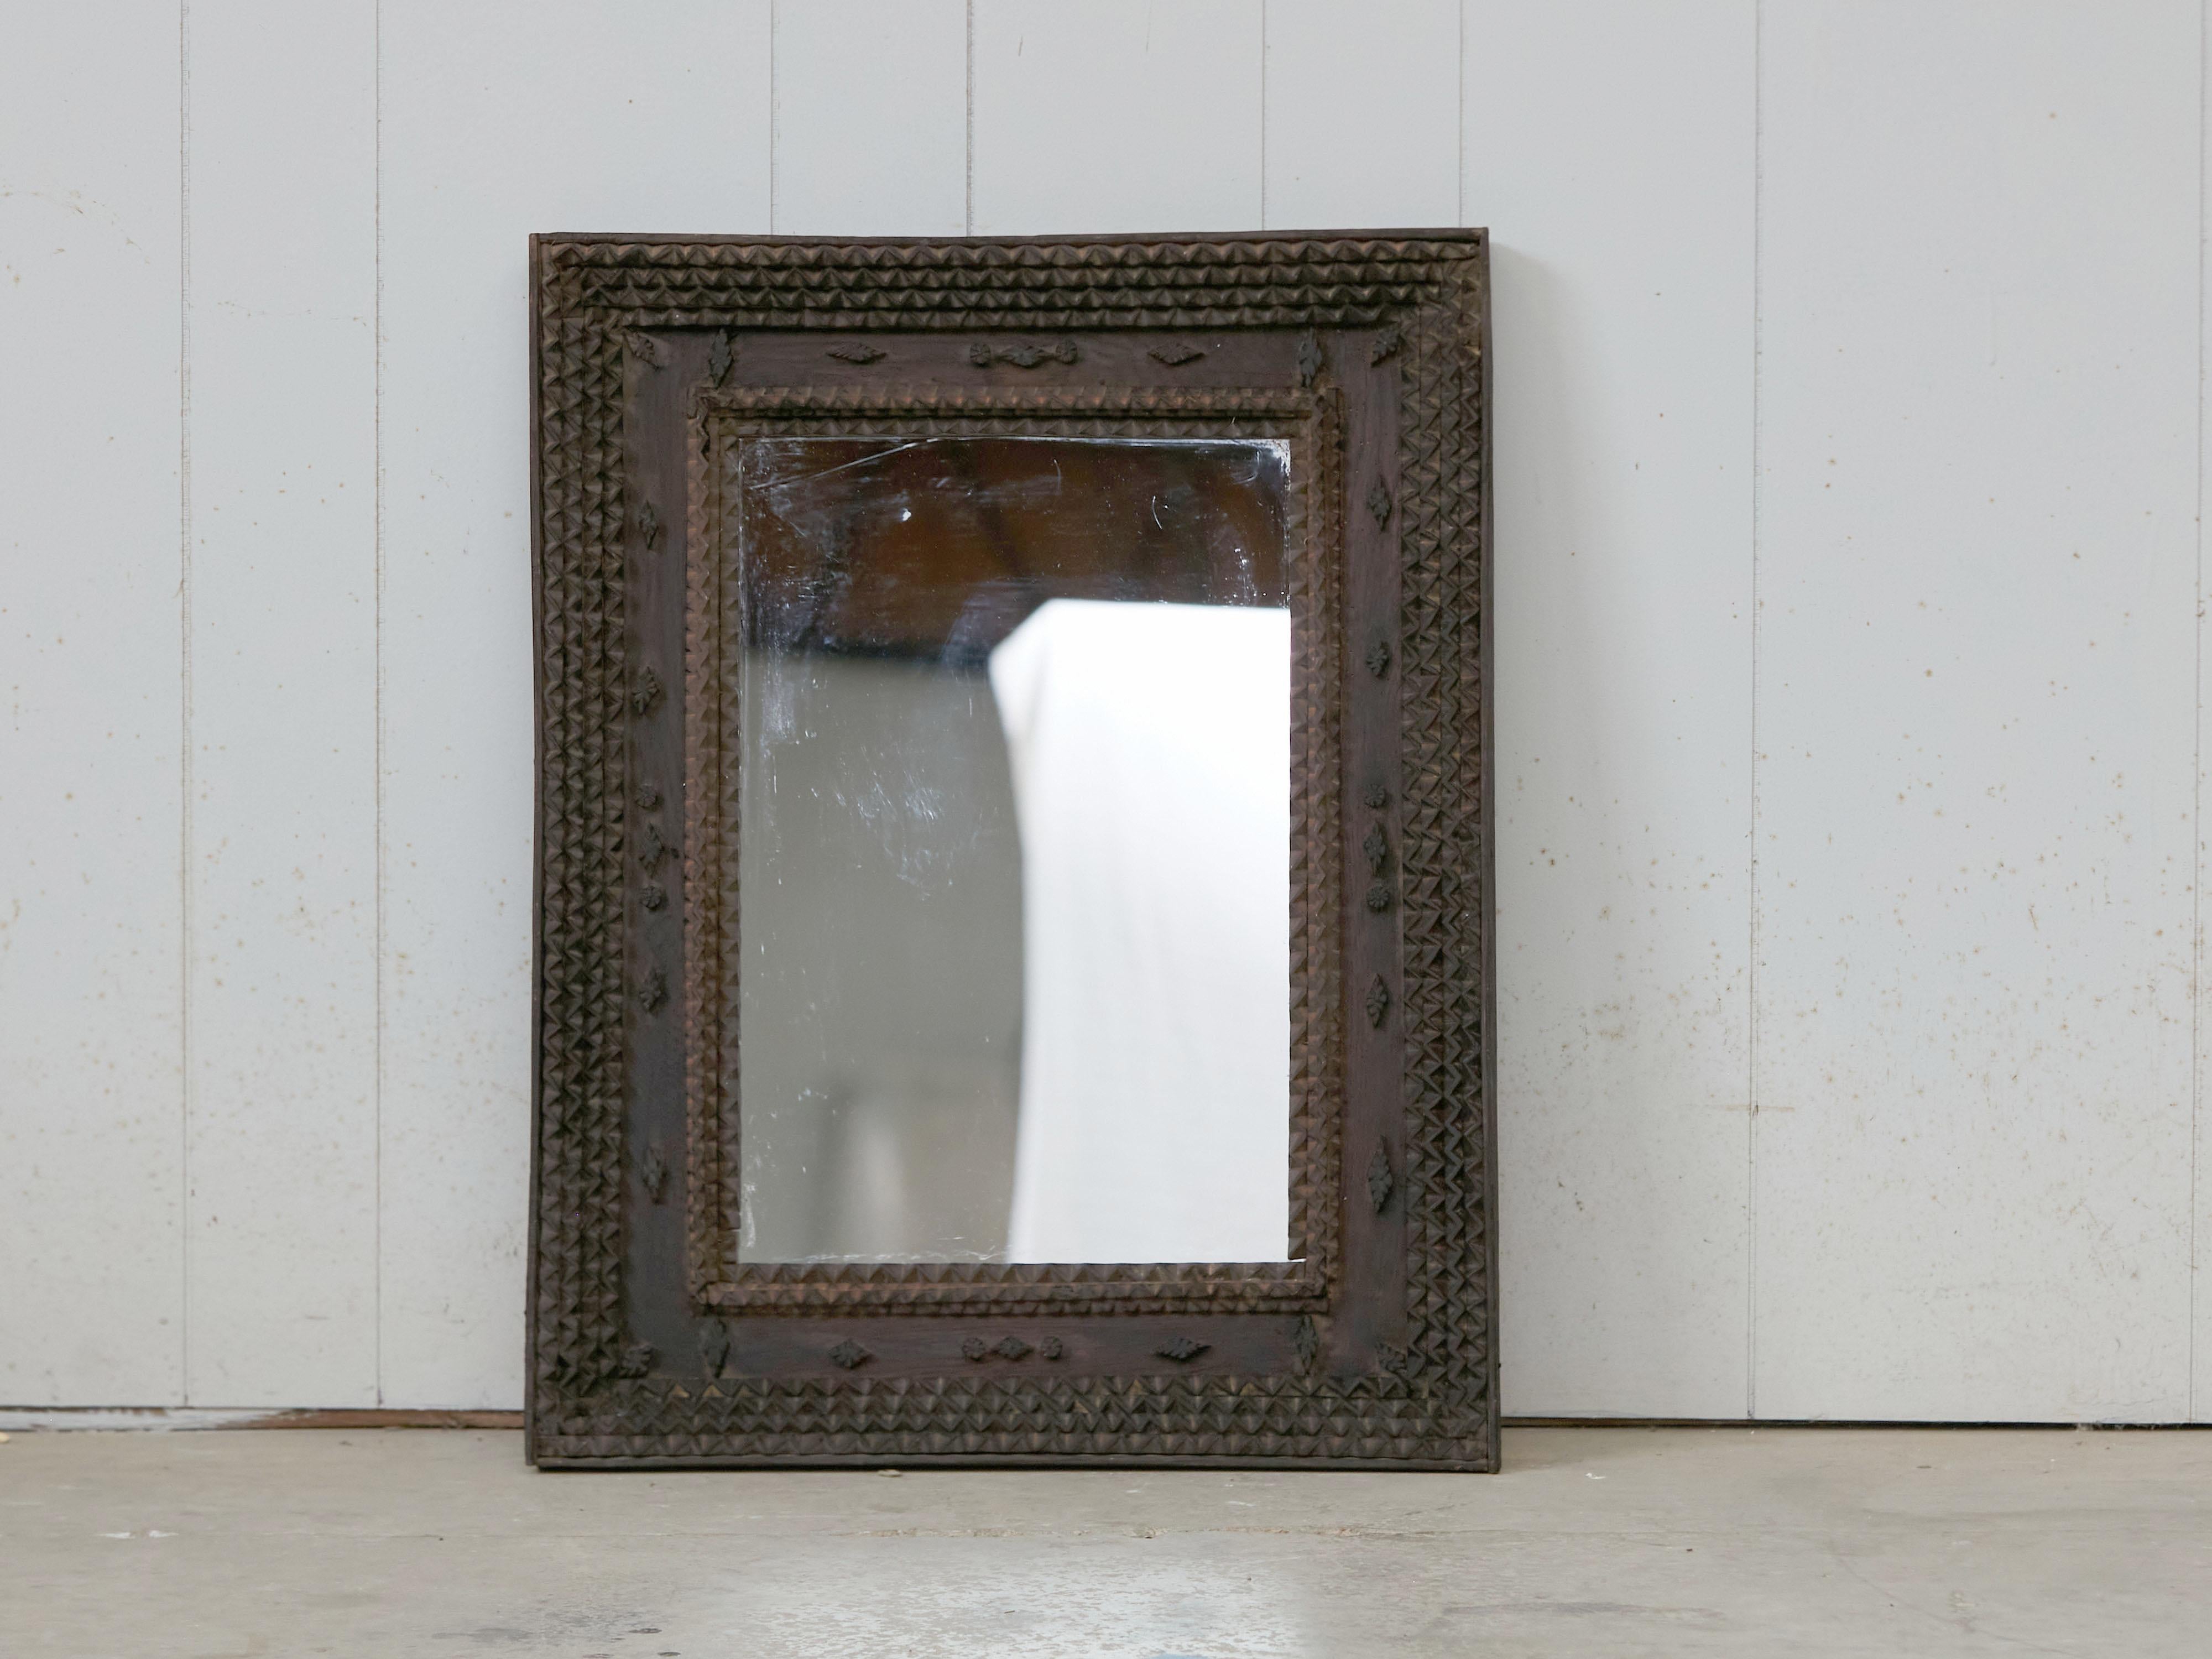 A French Tramp Art wall mirror from the early 20th century, with brown patina, and carved rosettes. Created in France during the turn of the century, this wall mirror features a rectangular frame, adorned with the typical Tramp Art touch made of an